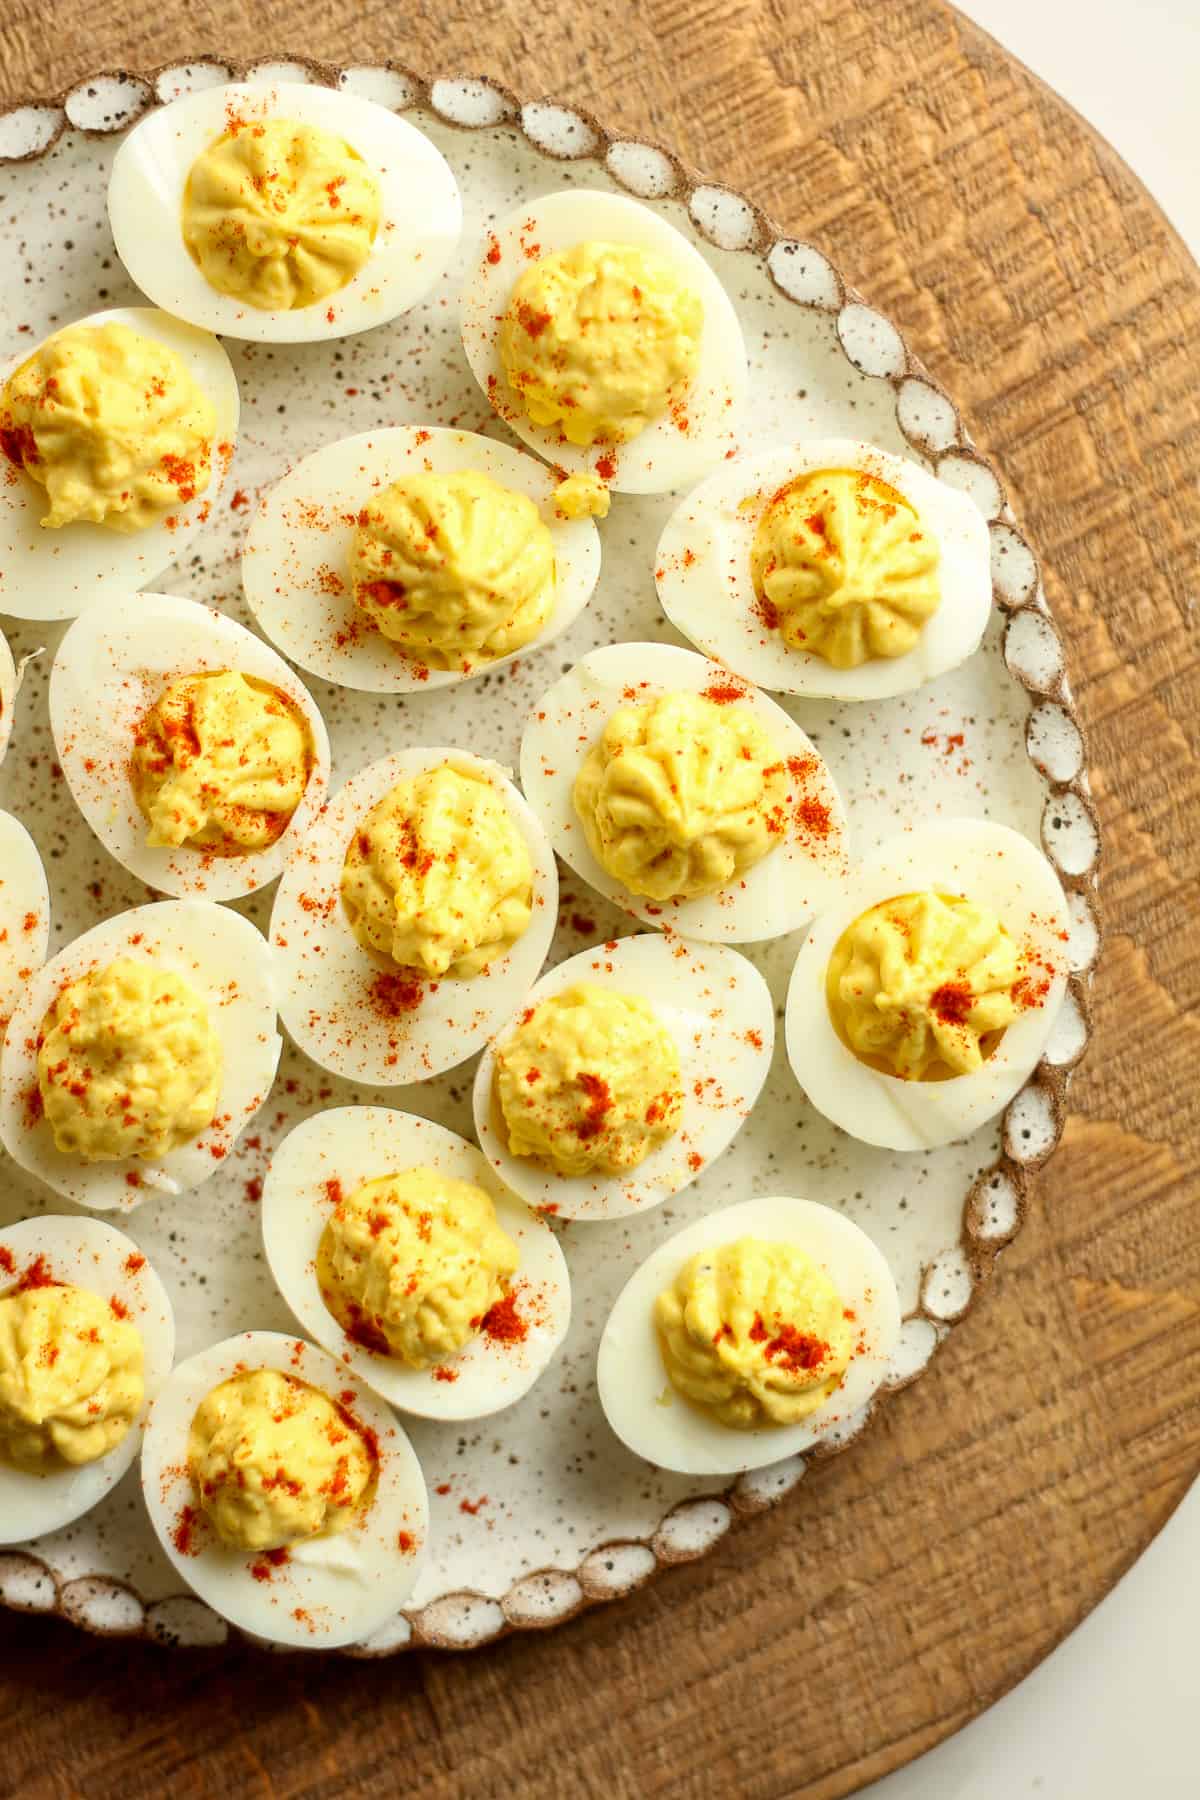 A partial shot of a plate of deviled eggs.